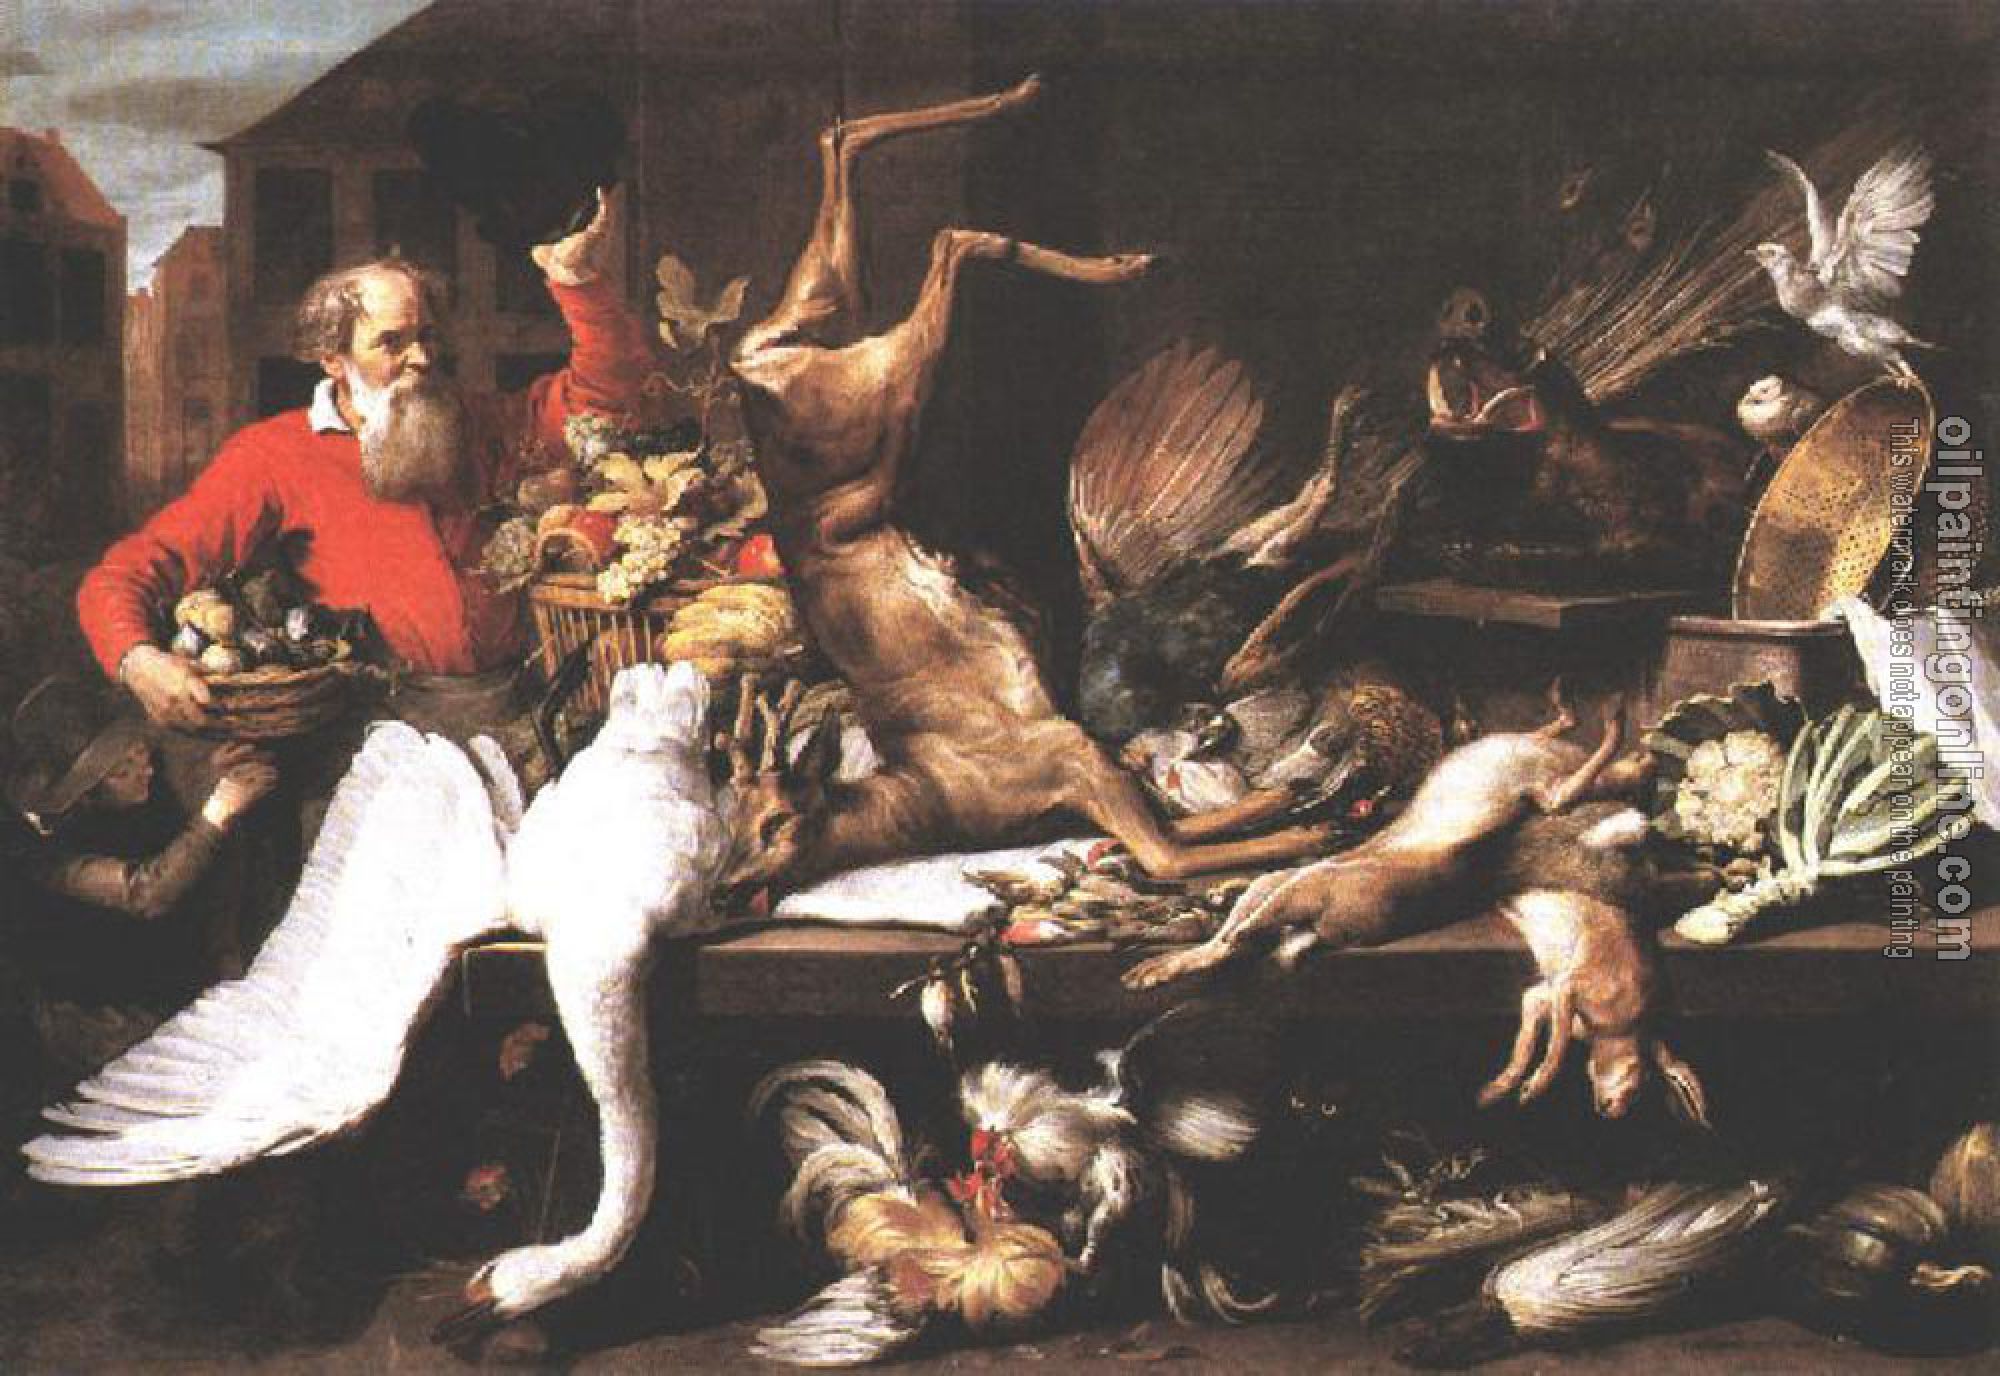 Frans Snyders - Still Life With Dead Game Fruits And Vegetables In A market